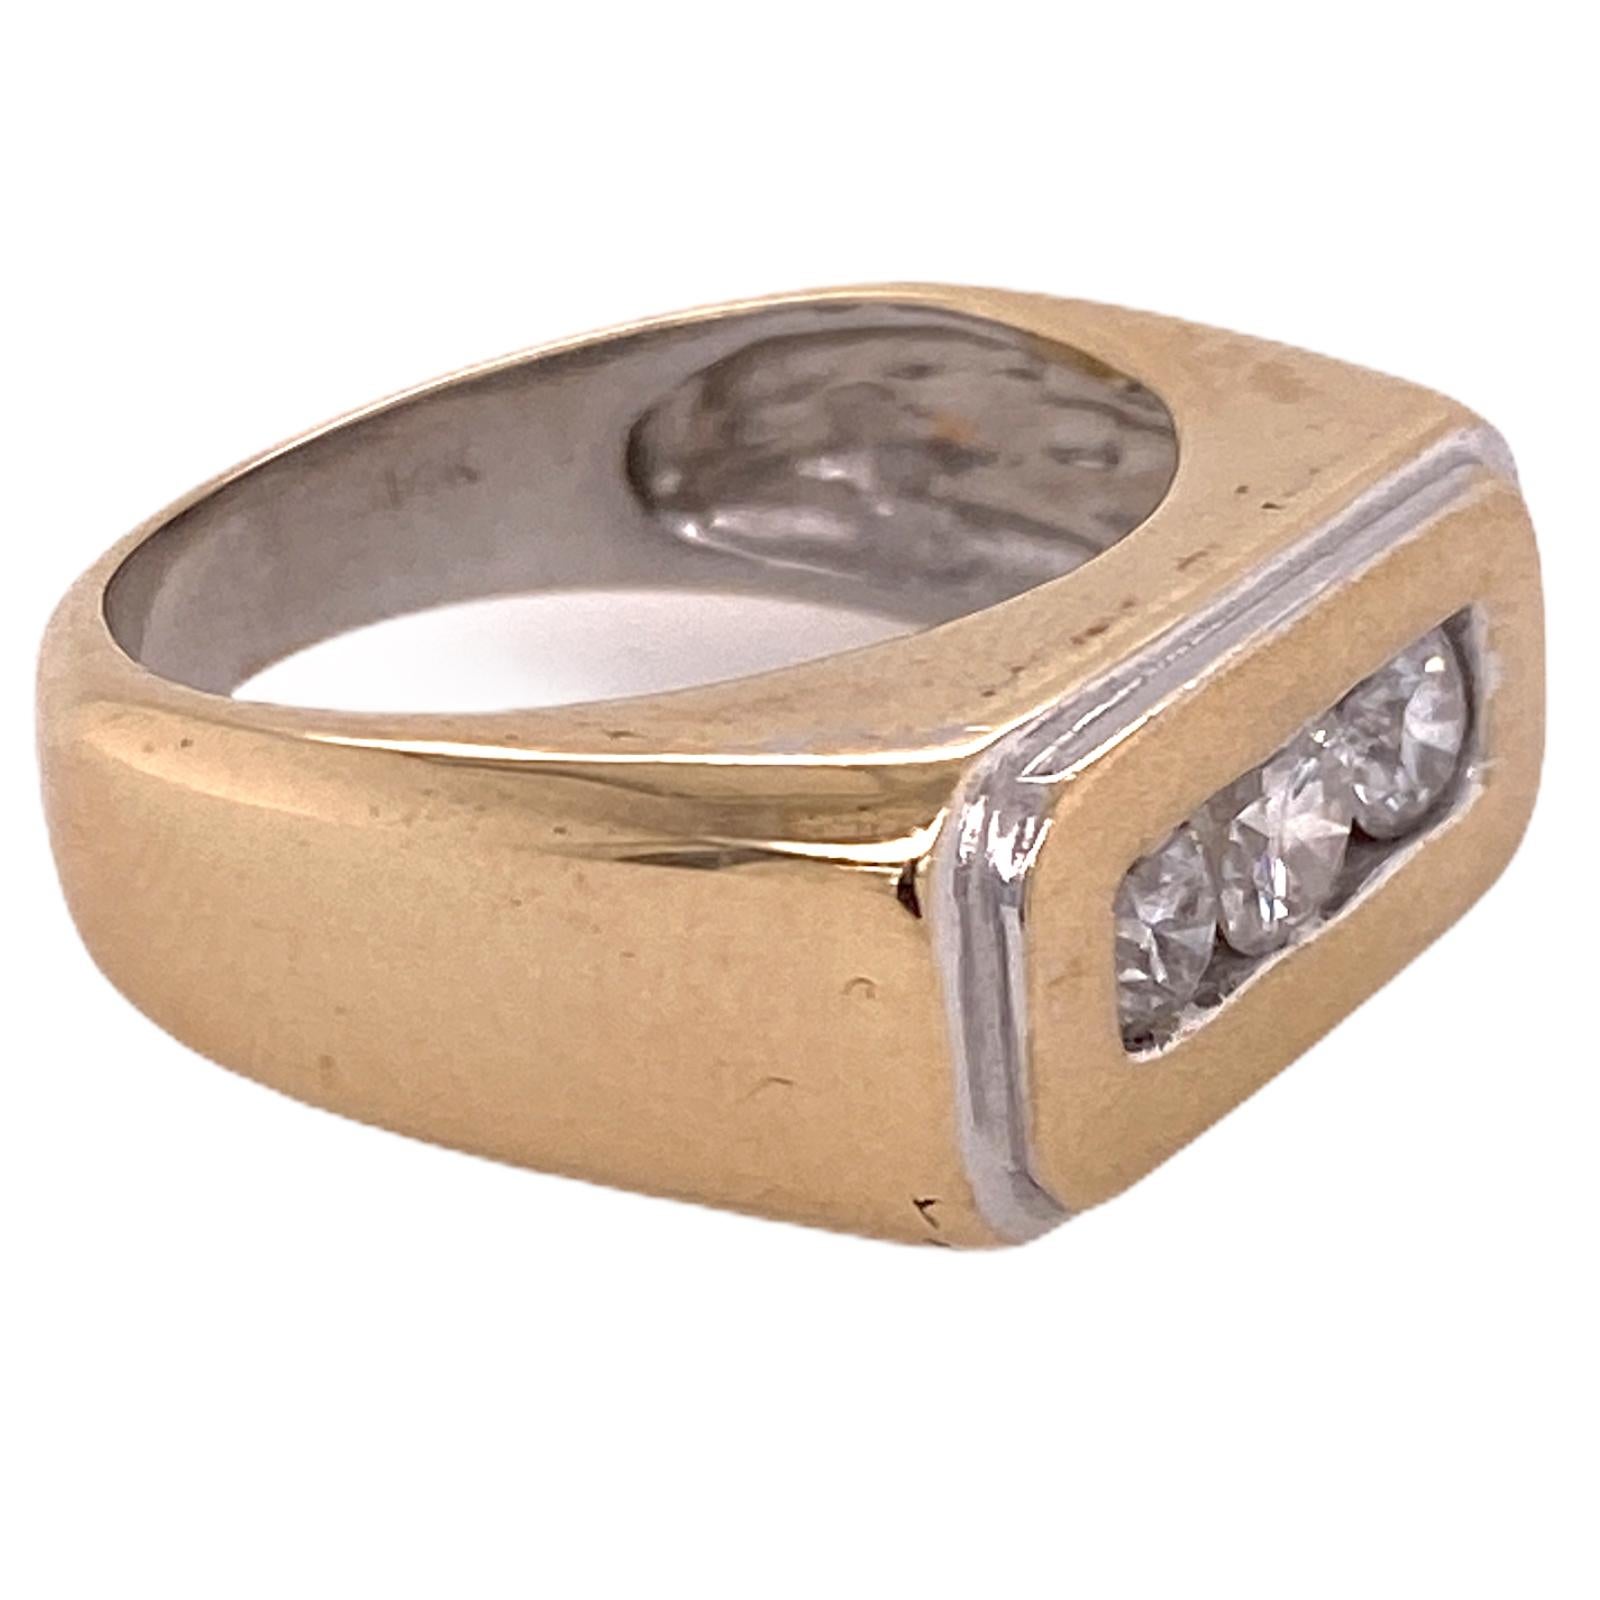 Fabulous men's 3 diamond ring fashioned in 14 karat yellow and white gold. The band features 3 round brilliant cut diamonds weighing approximately 1.00 carat total weight. The diamonds are graded H-I color and SI clarity. The ring measures 10mm